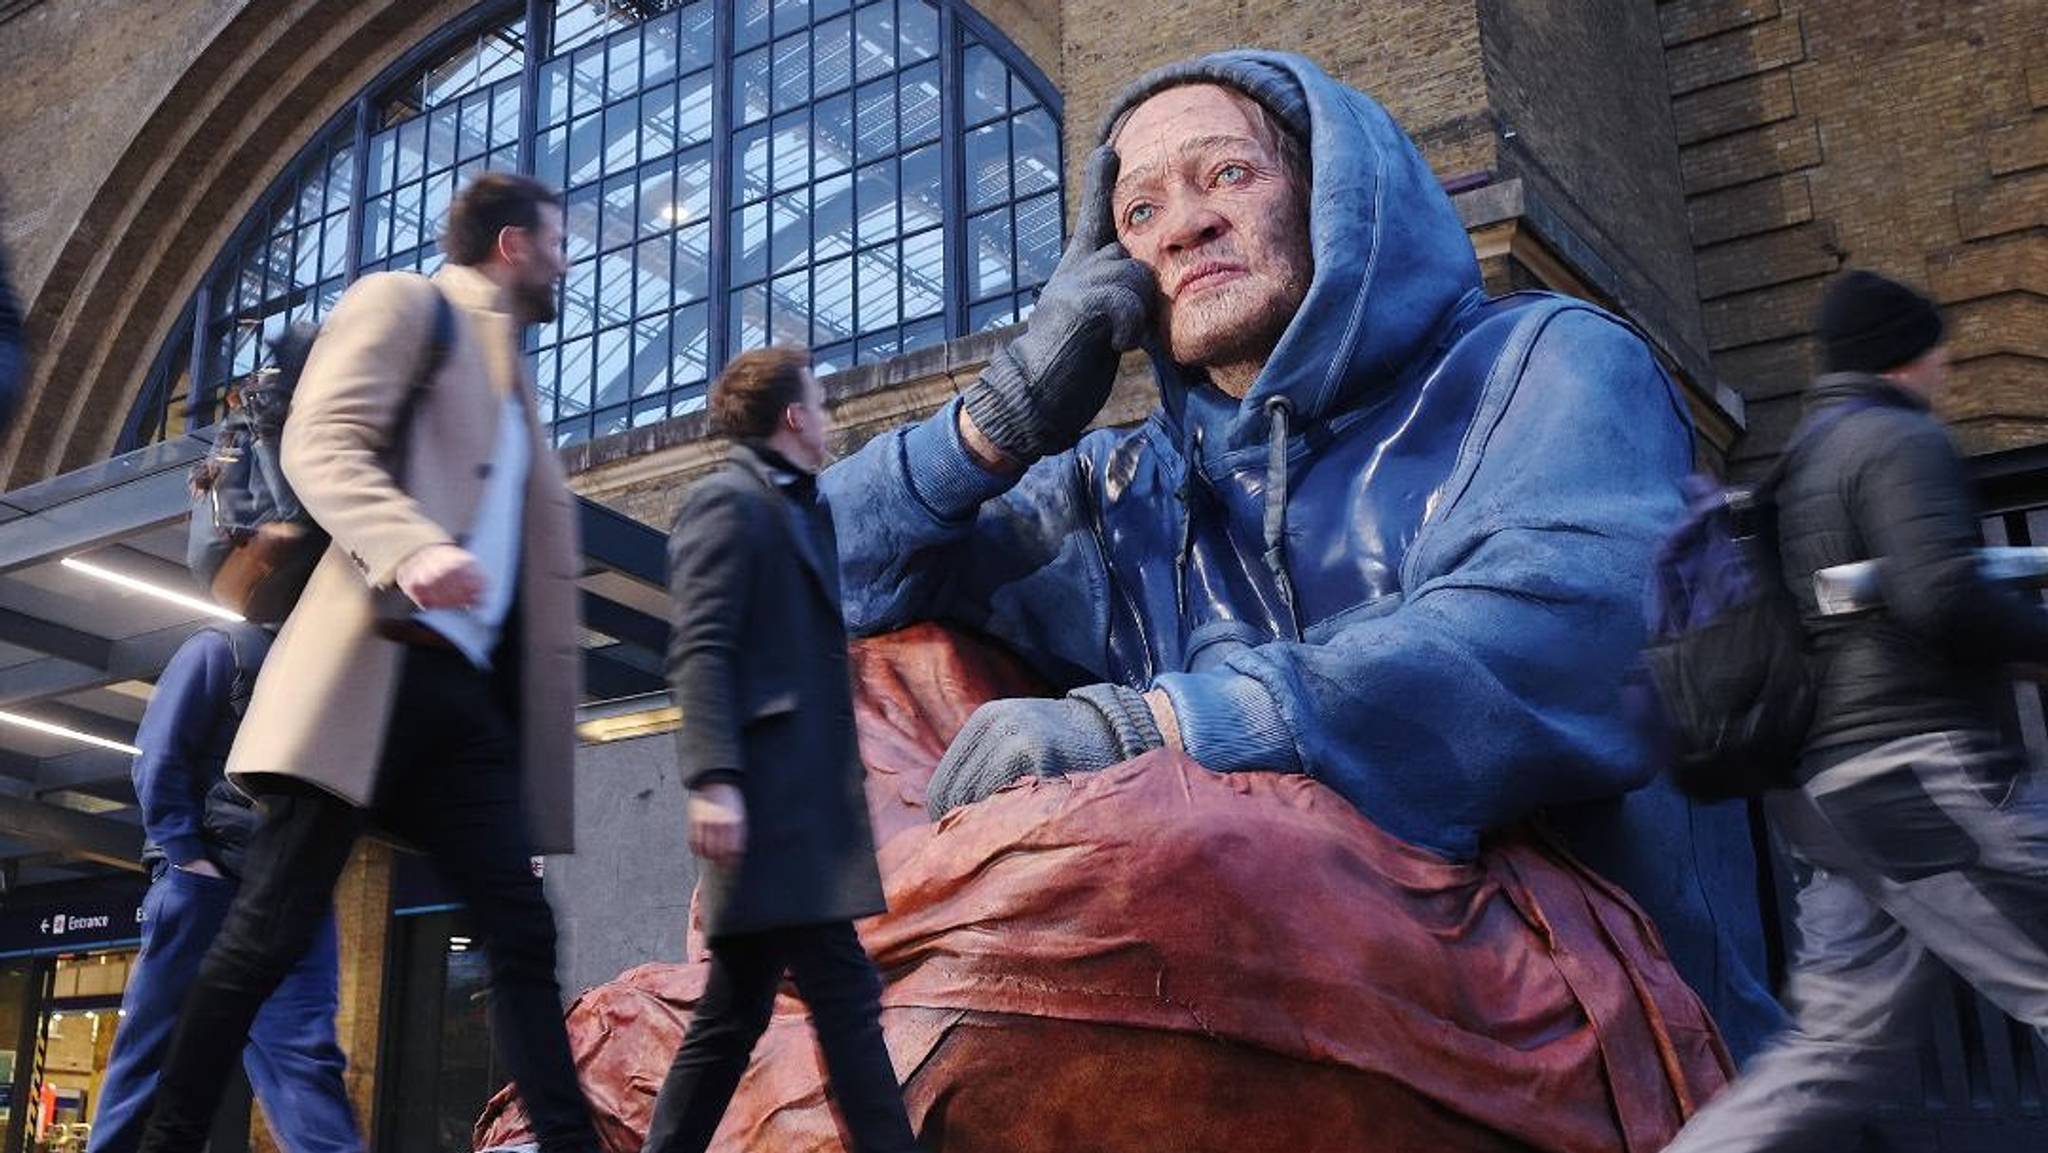 Crisis sculpture makes homelessness impossible to ignore